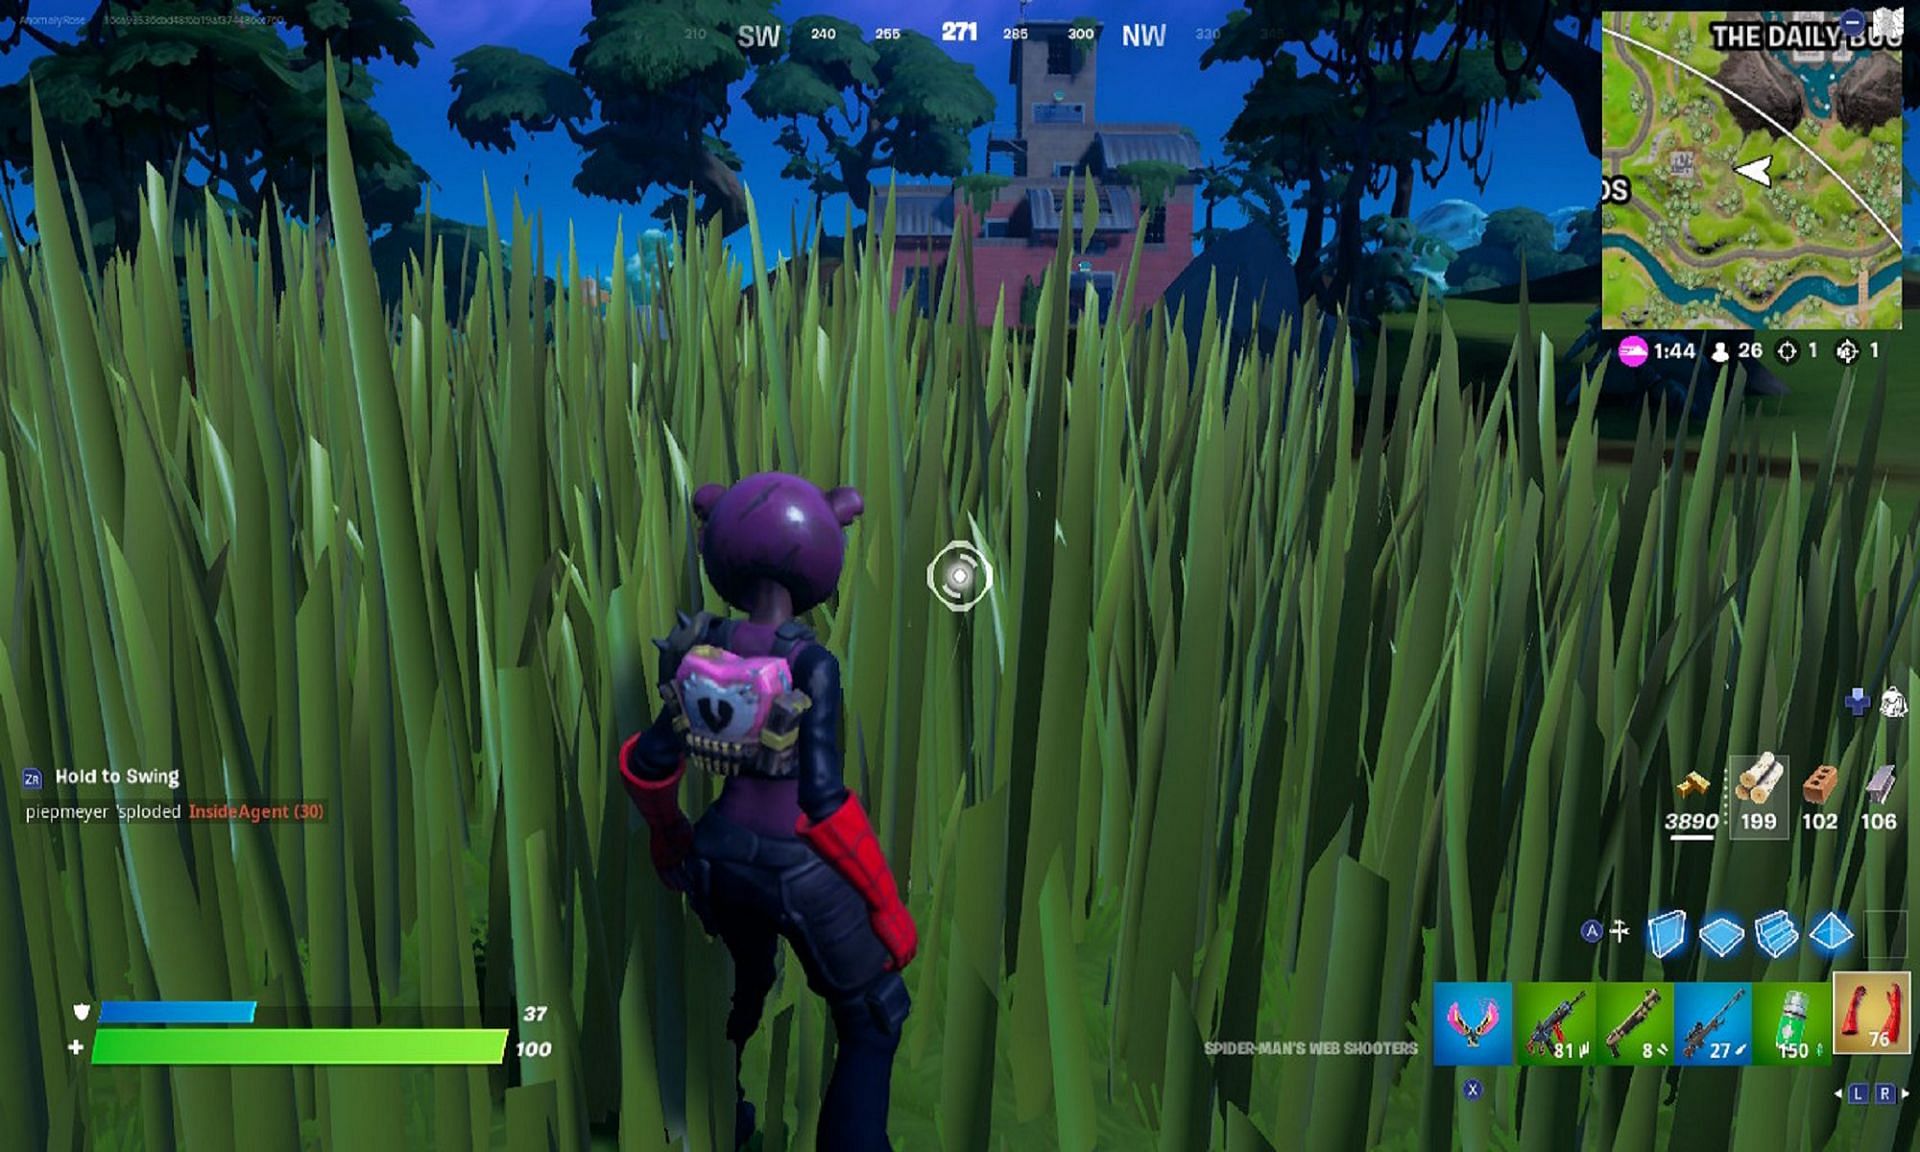 Sadly, players cannot touch this grass in Fortnite (Image via Twitter/SteeleRose_)